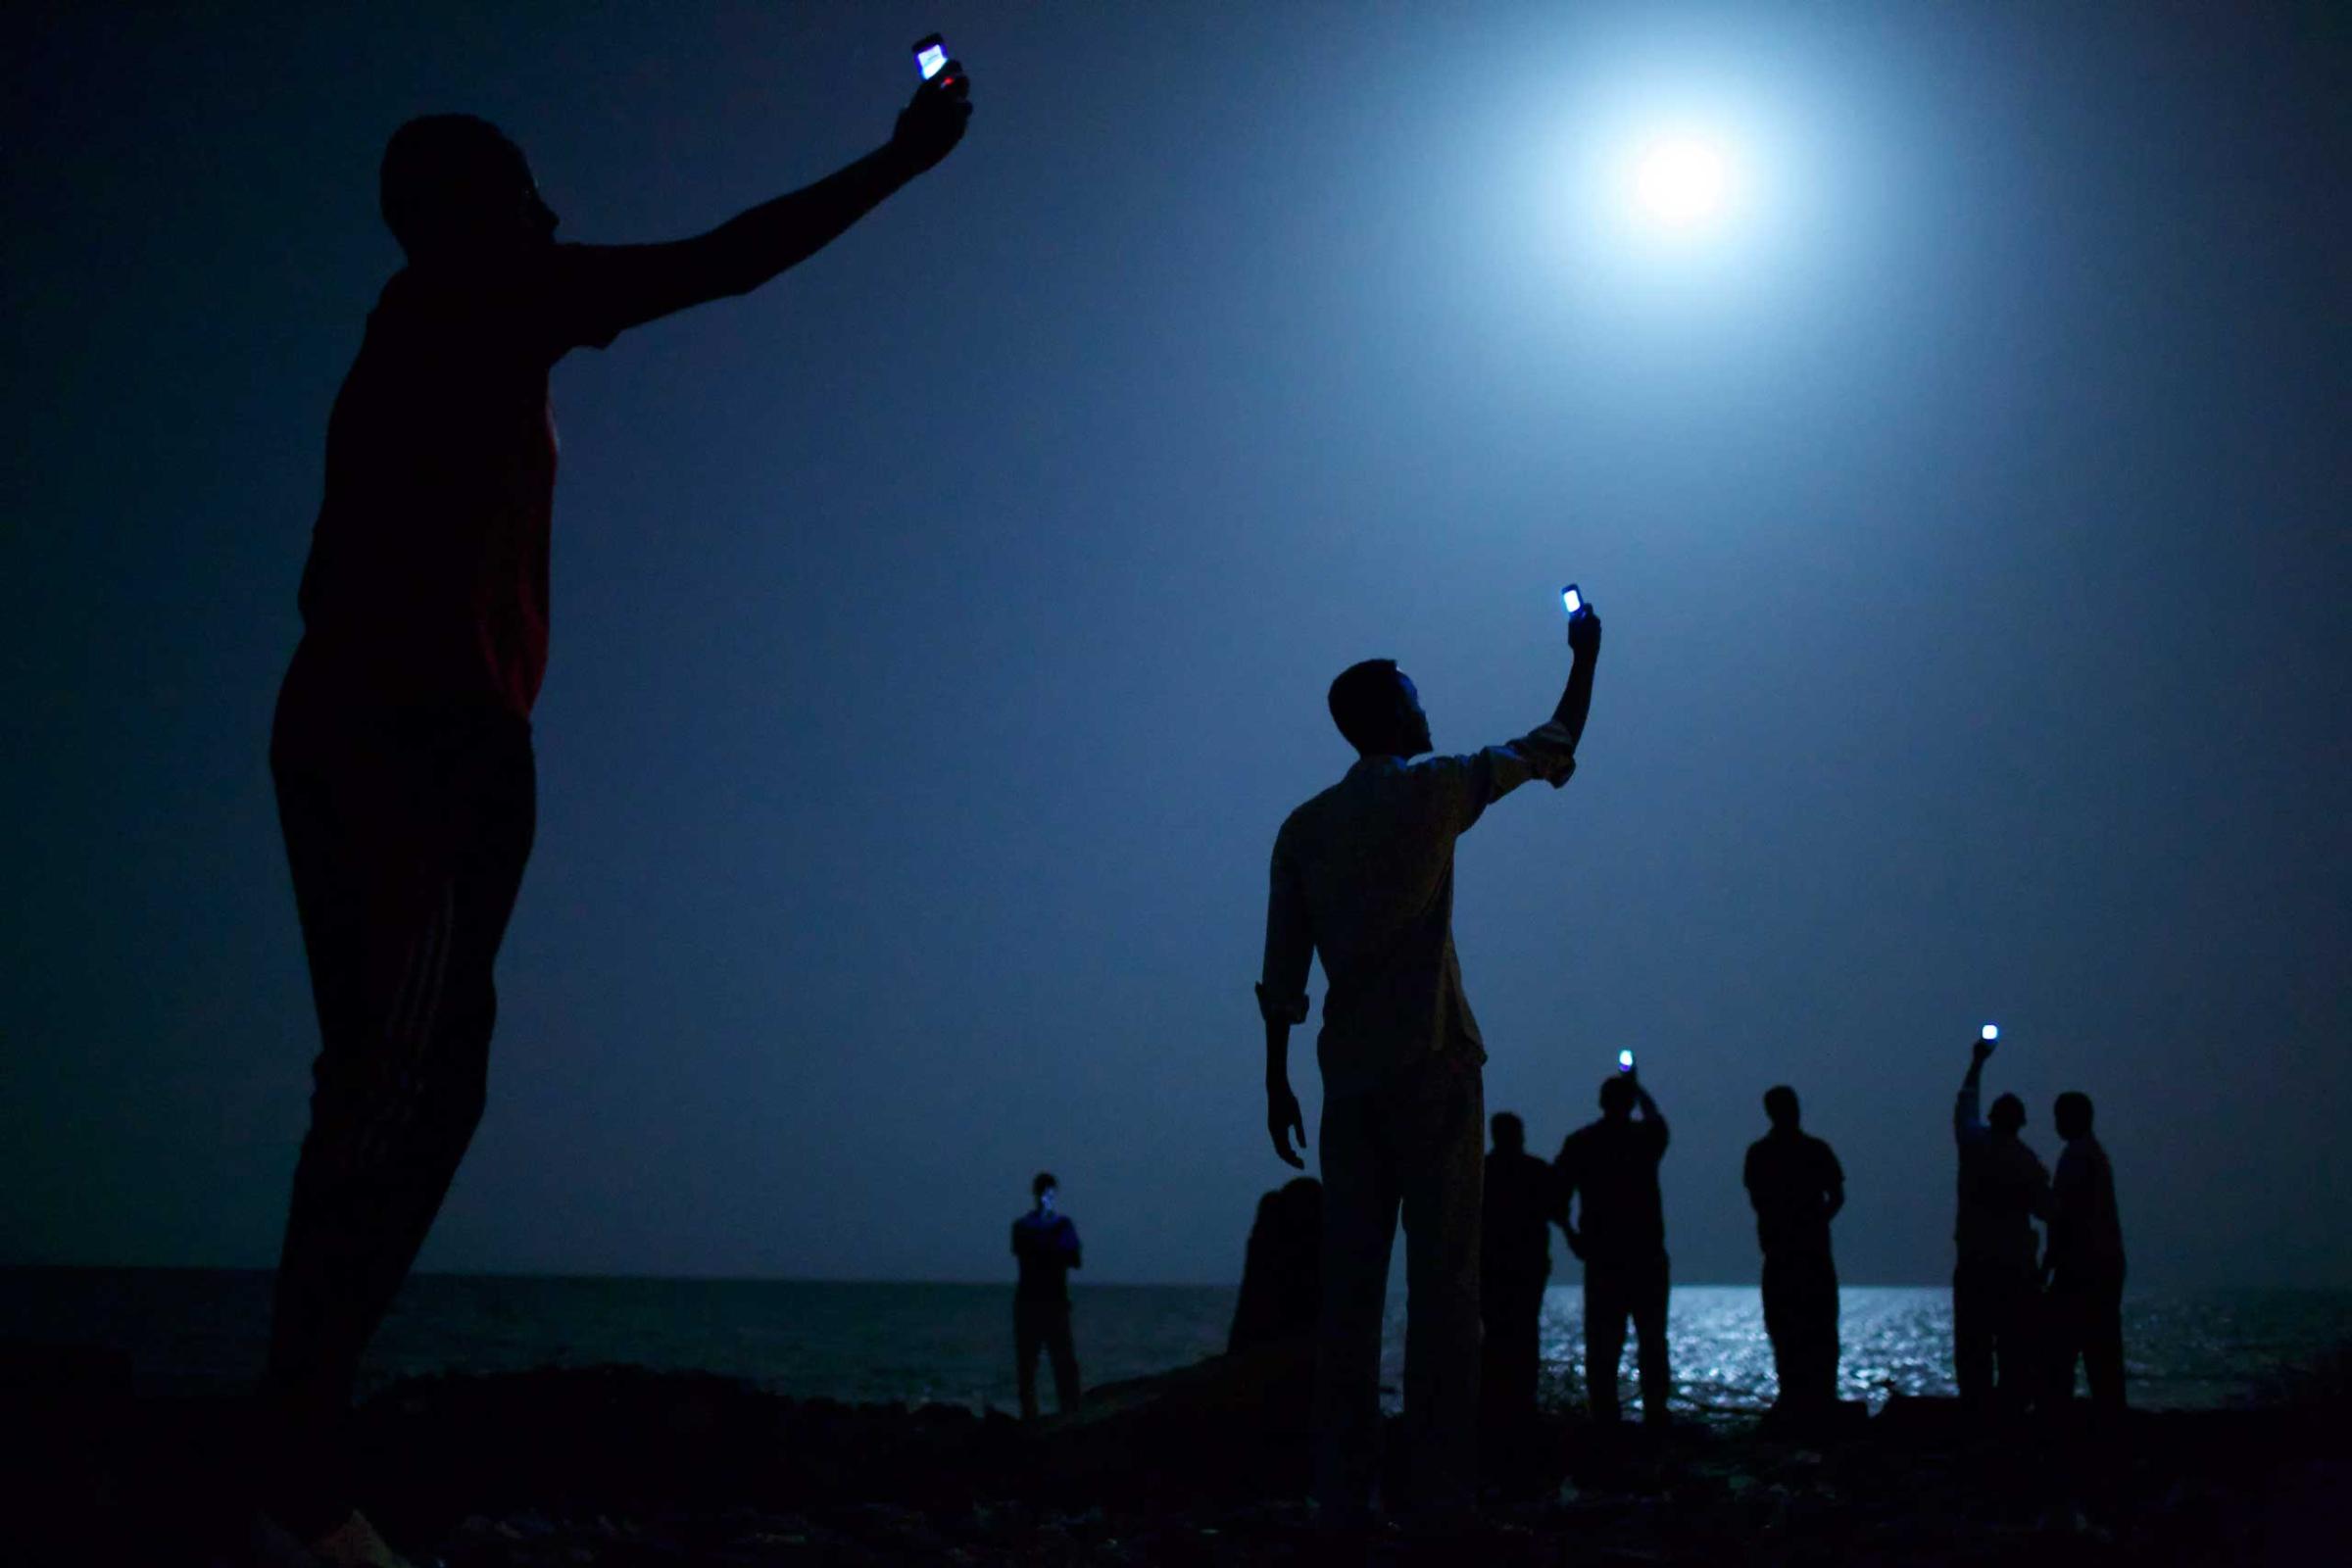 Somali's wave their mobile phones doing what is known among locals as 'Catching,' in an attempt to catch or pickup the mobile phone tower in neighboring Somalia as they stand on Khorley Beach, also called Dead Water Beach, in Djibouti City, Djibouti, Feb. 26, 2013. As a means to stay in contact with their family and friends back home, one purchases a Somalia SIMM card from the black-market in Djibouti City, placing the SIMM in mobile phone and swinging about the phone in specific areas where a signal might be caught. The best time to catch the signals are at night. Djibouti City to the border of Somalia where the nearest Somali cell tower is located is only roughly 30 miles (48 kilometers) south of the capital of Djibouti.555